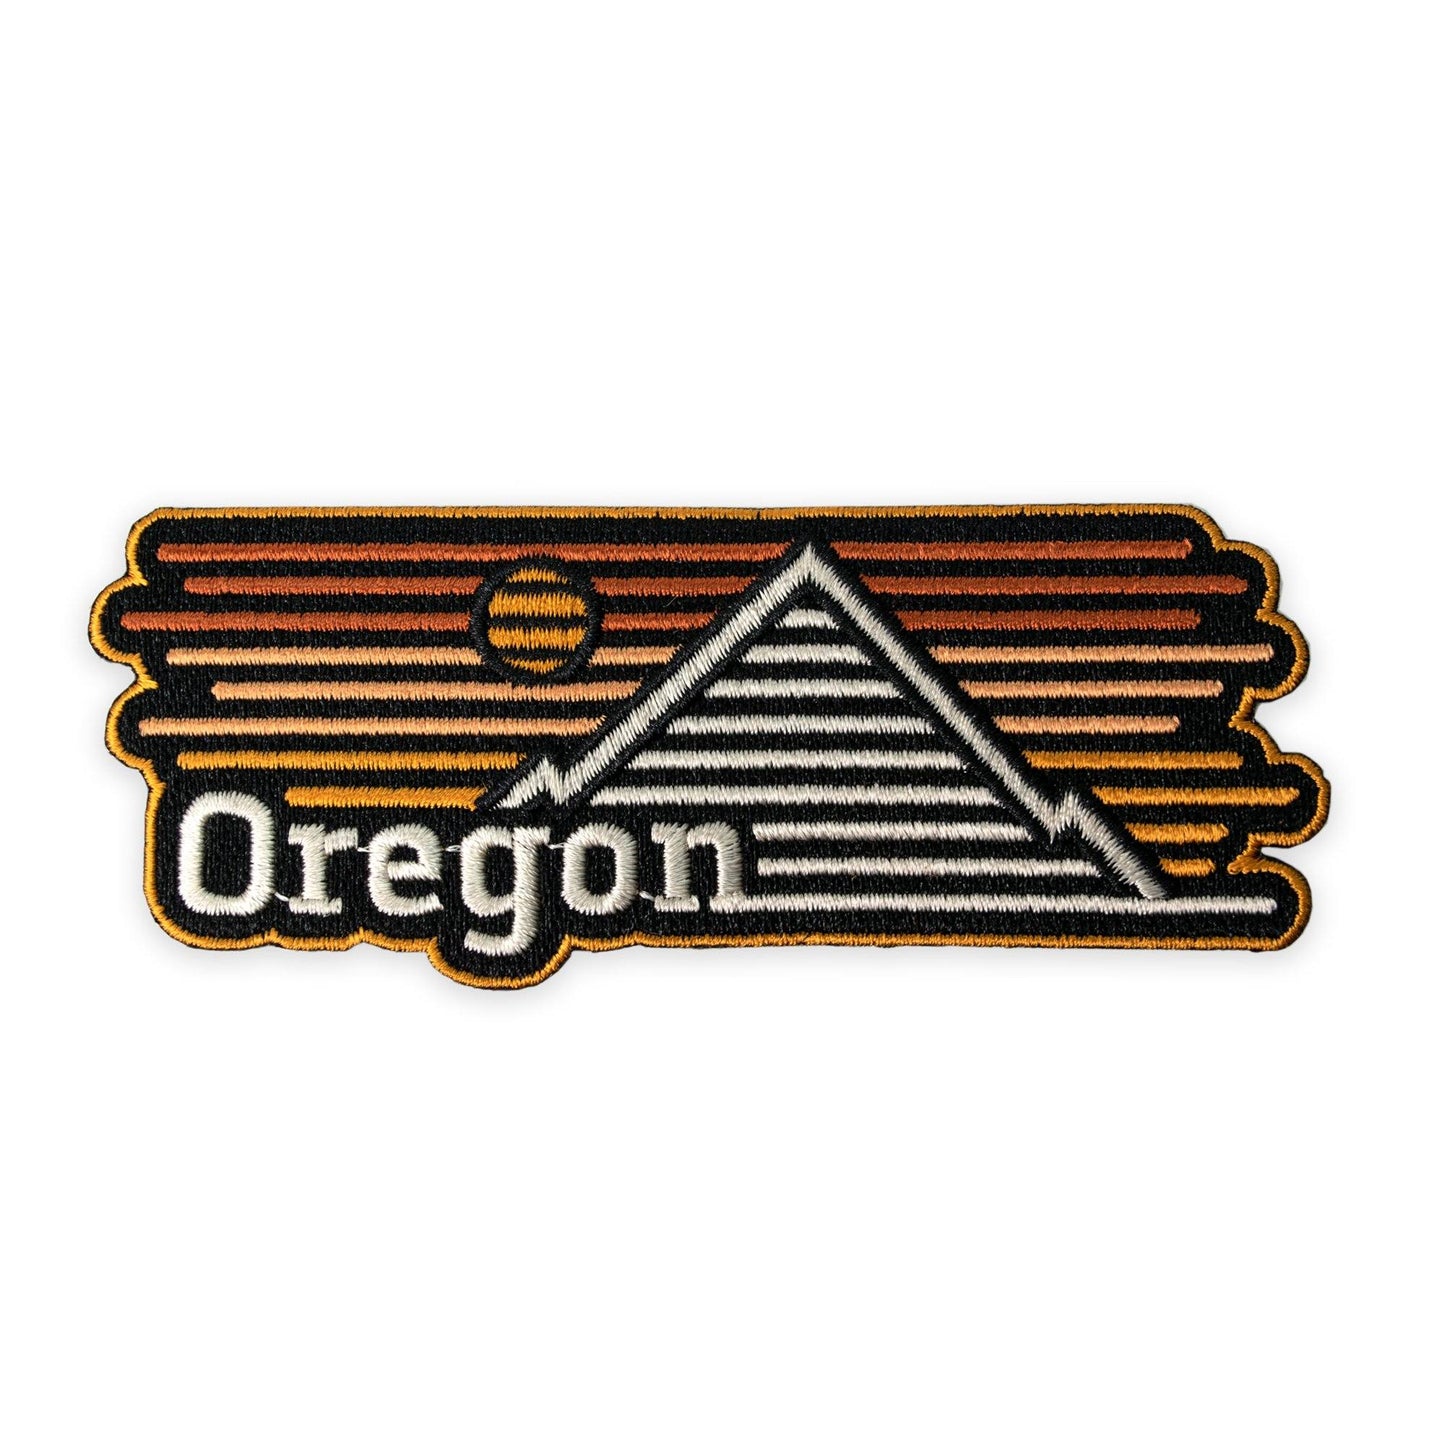 Oregon Horizons | Embroidered Patch